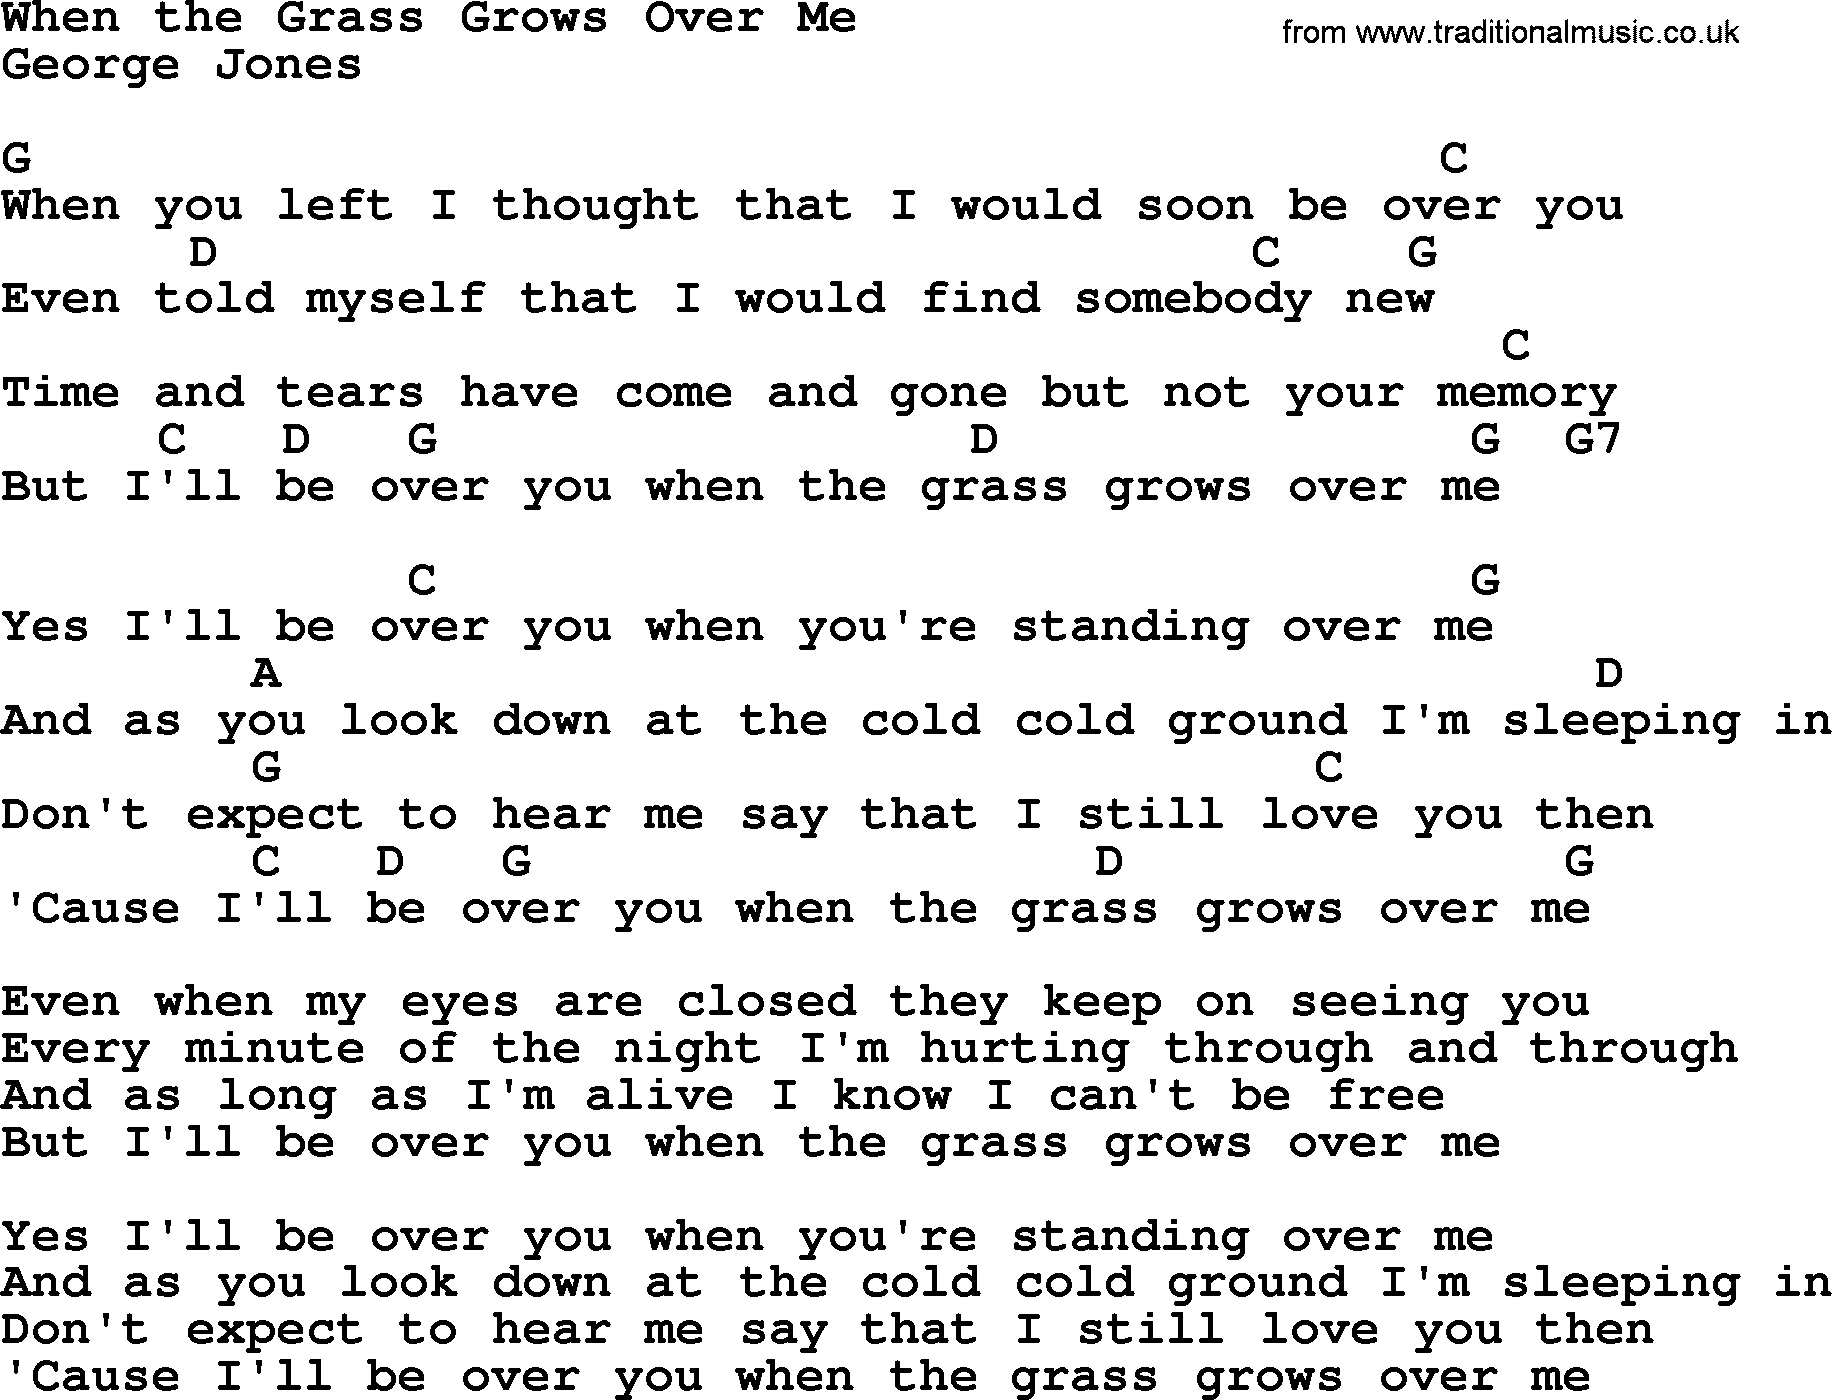 George Jones song: When The Grass Grows Over Me, lyrics and chords